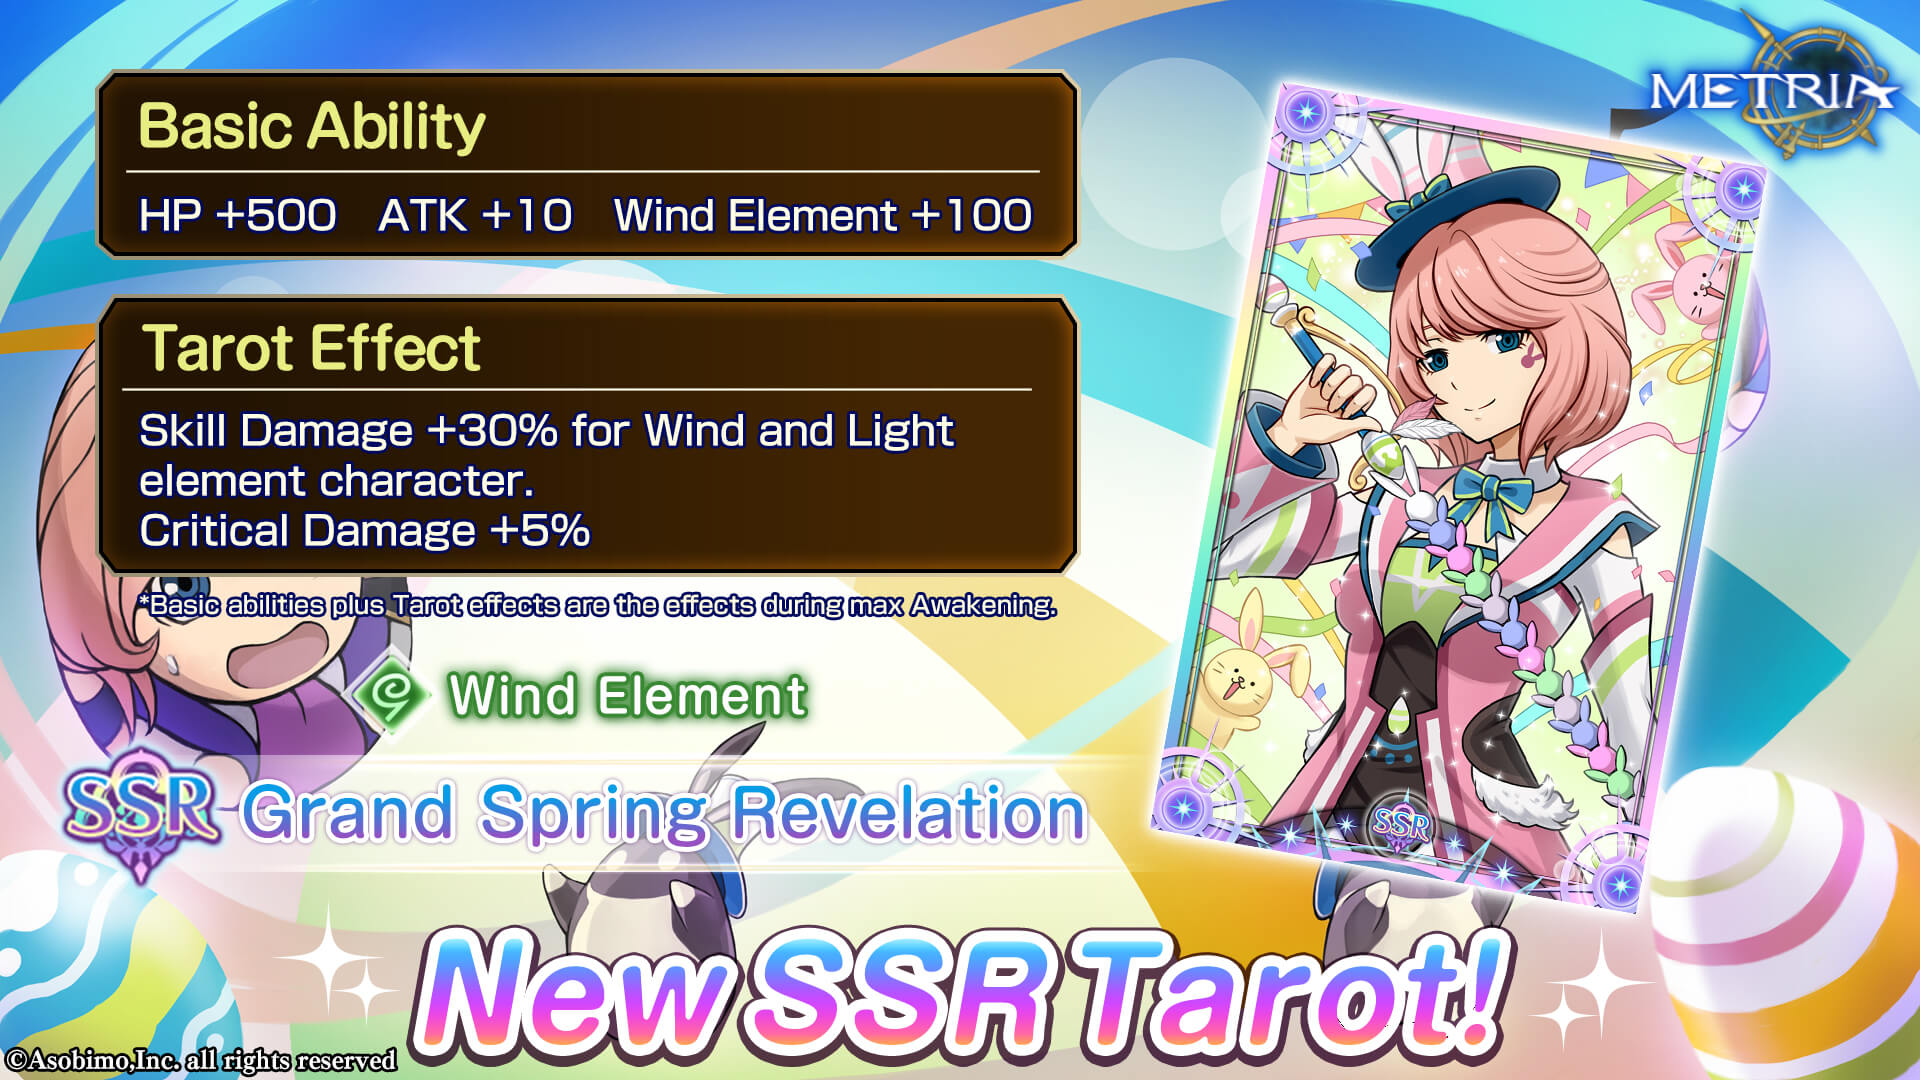 Wind Element New SSR Tarot: "Grand Spring Revelation" Available for Purchase!